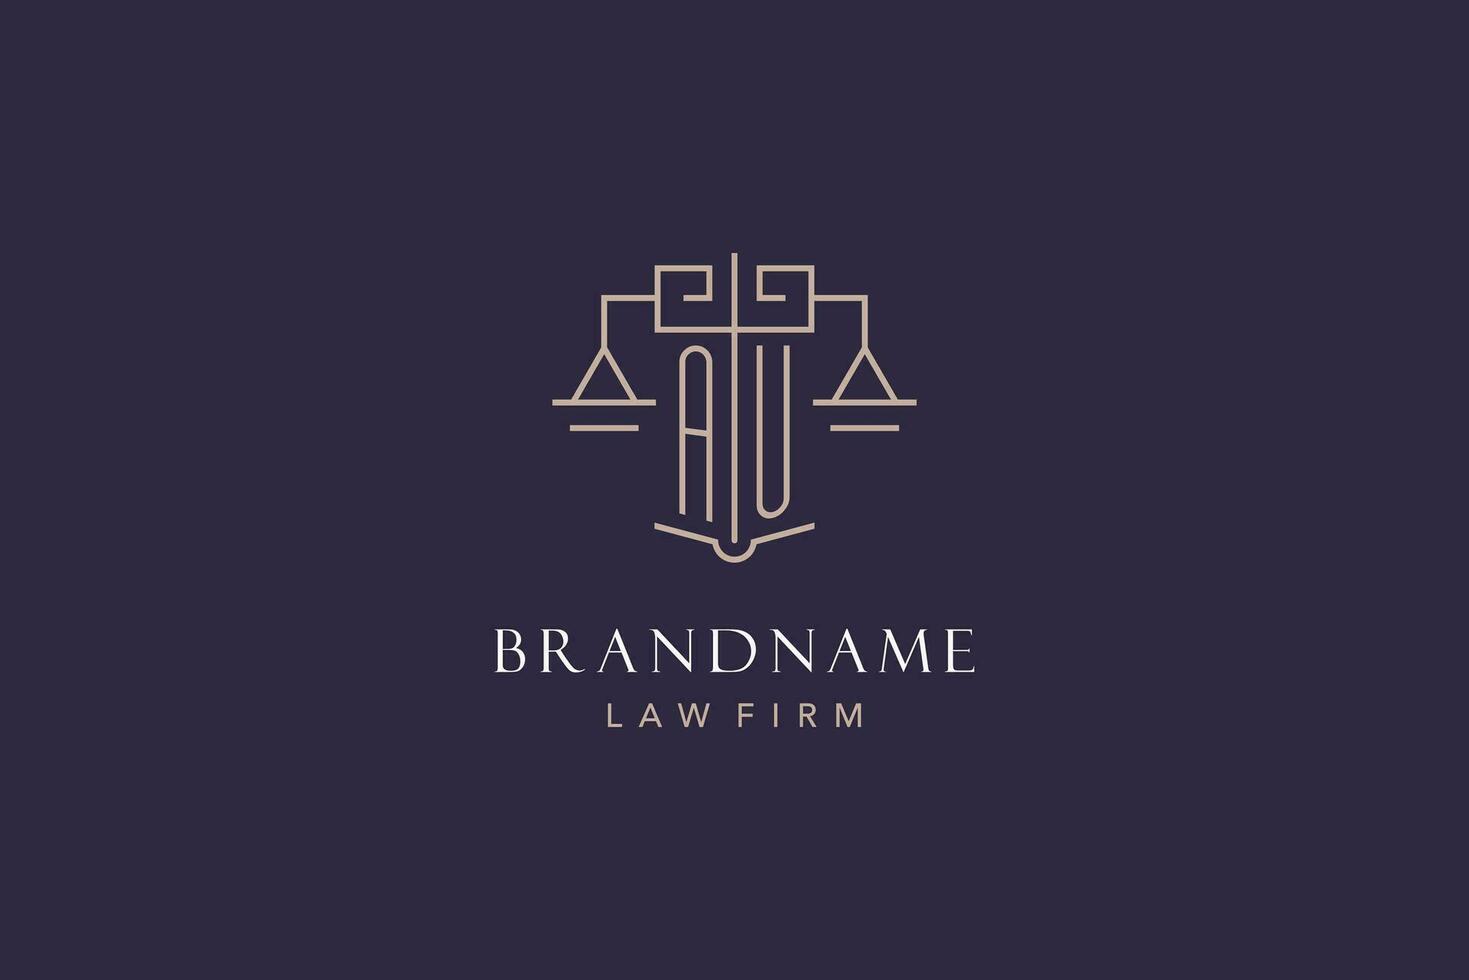 Initial letter AU logo with scale of justice logo design, luxury legal logo geometric style vector